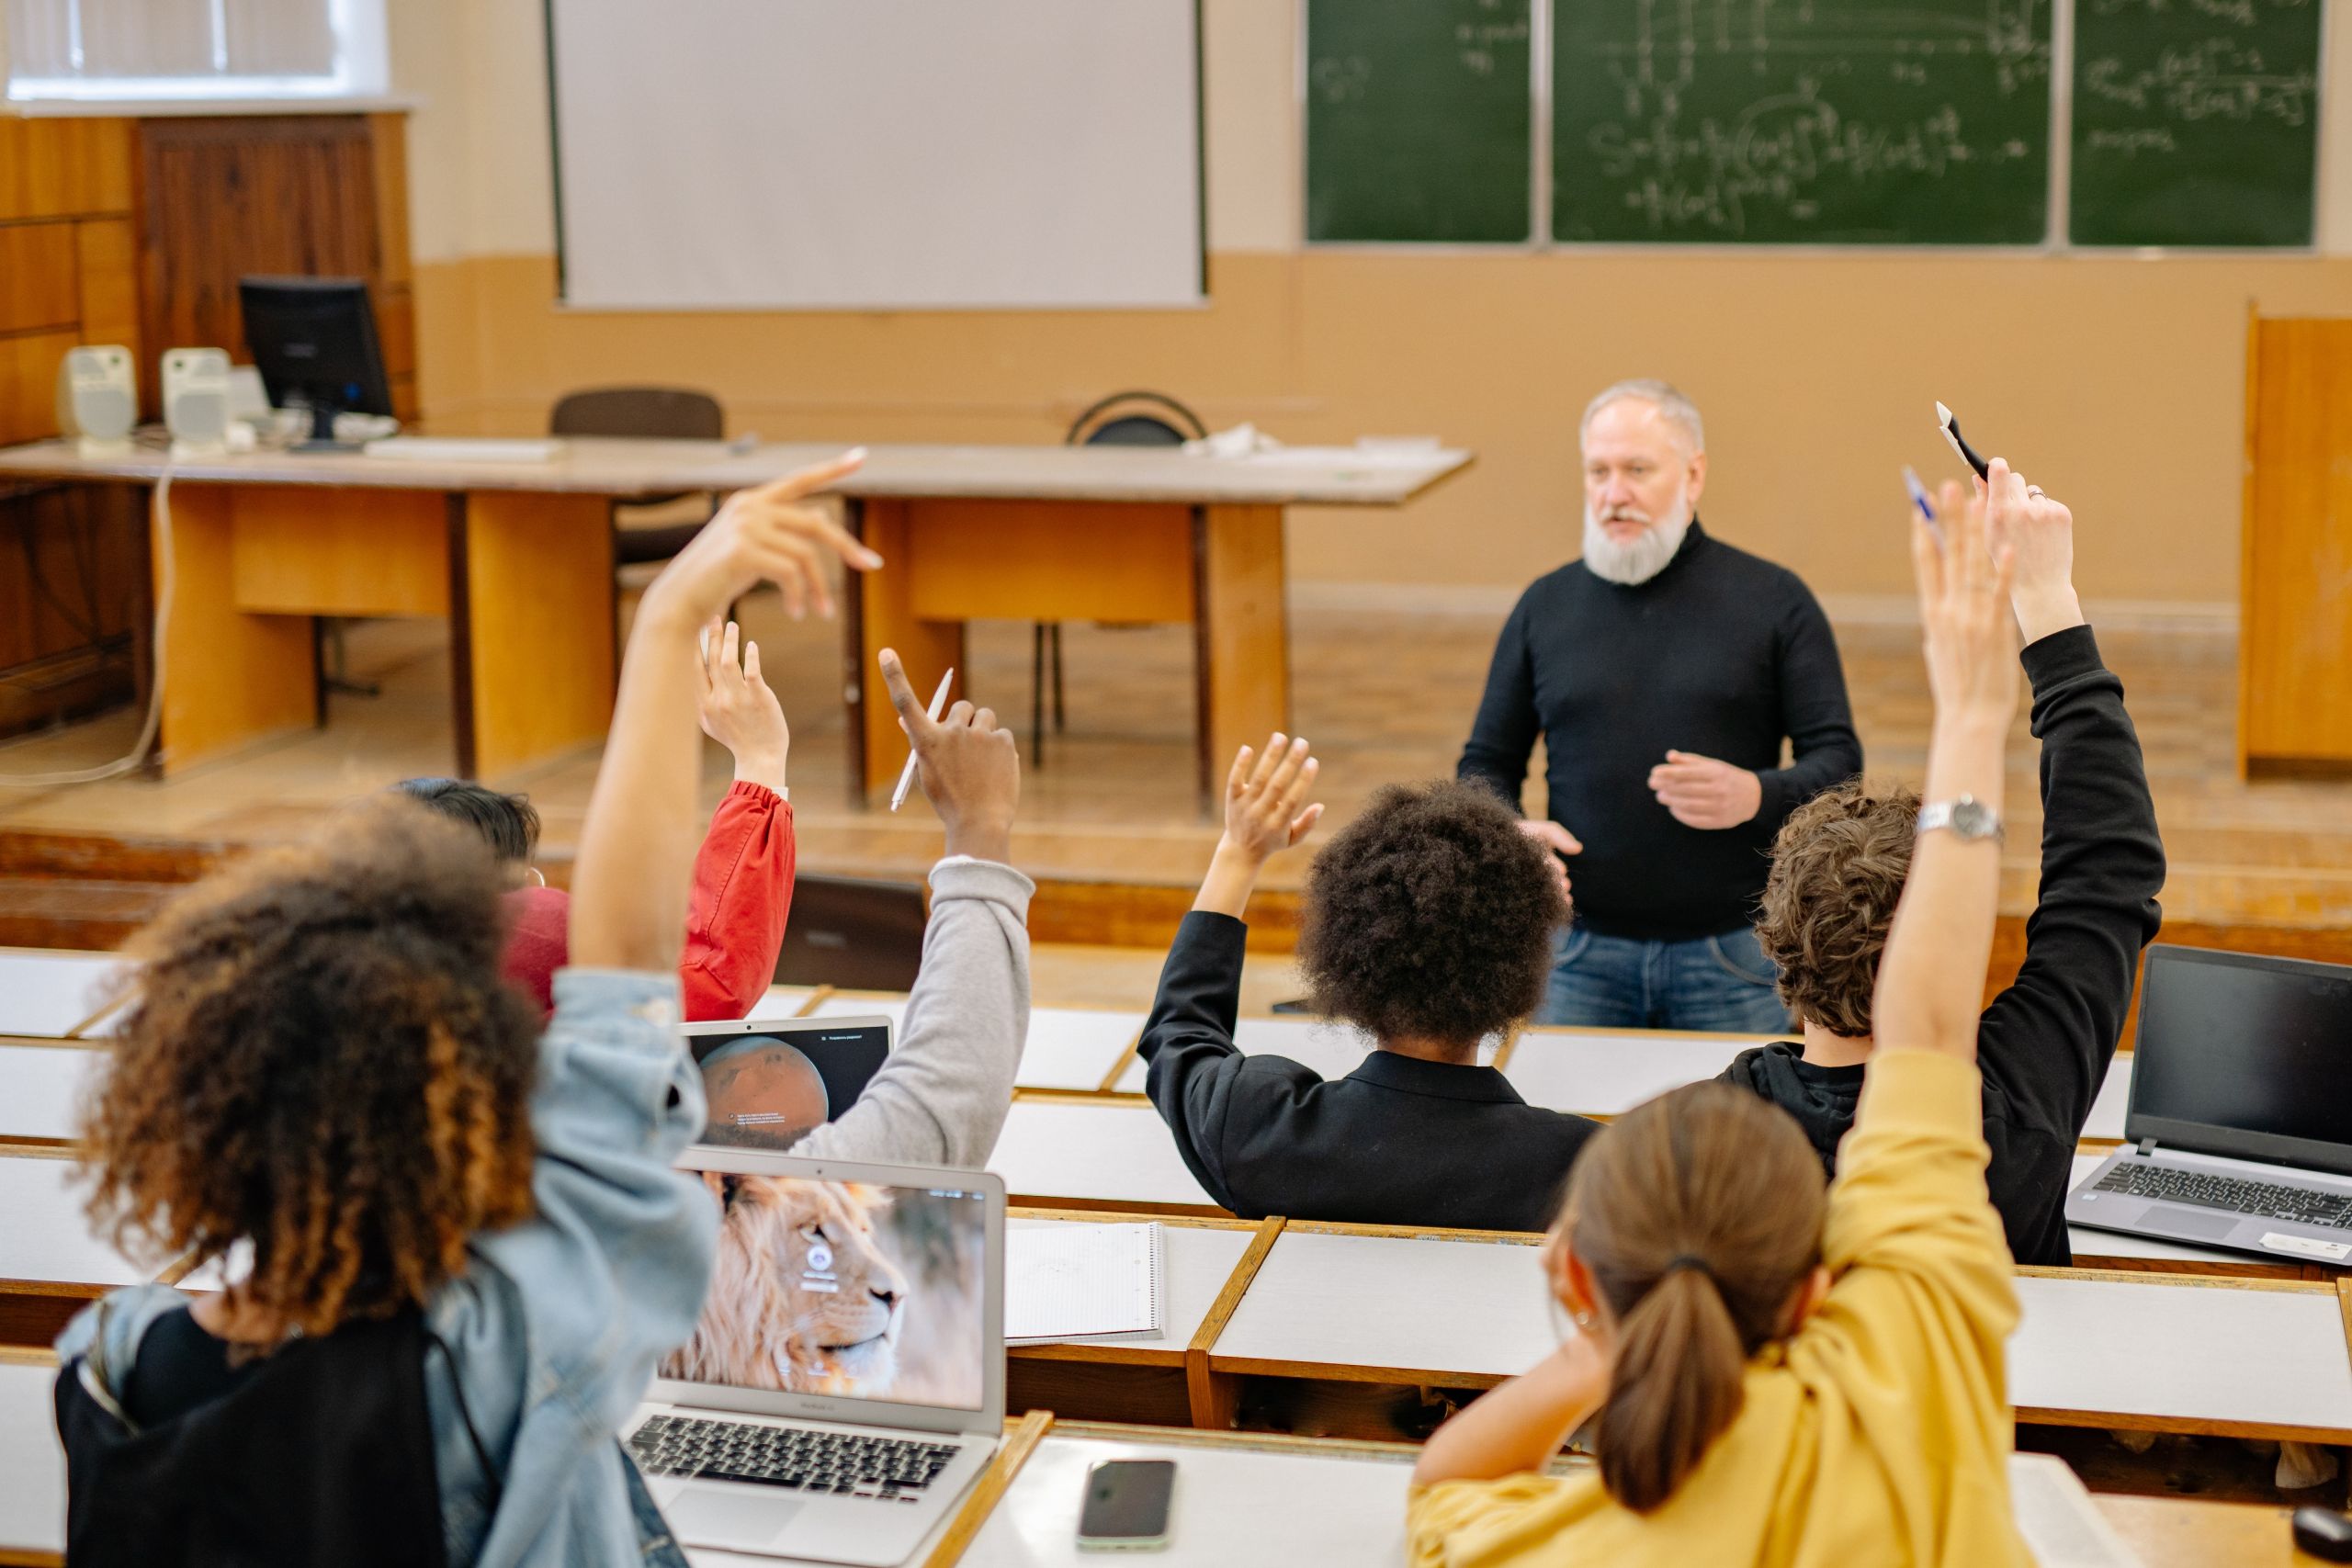 Students raising their hands to speak in a lecture. Photo by Yan Krukau via Pexels.